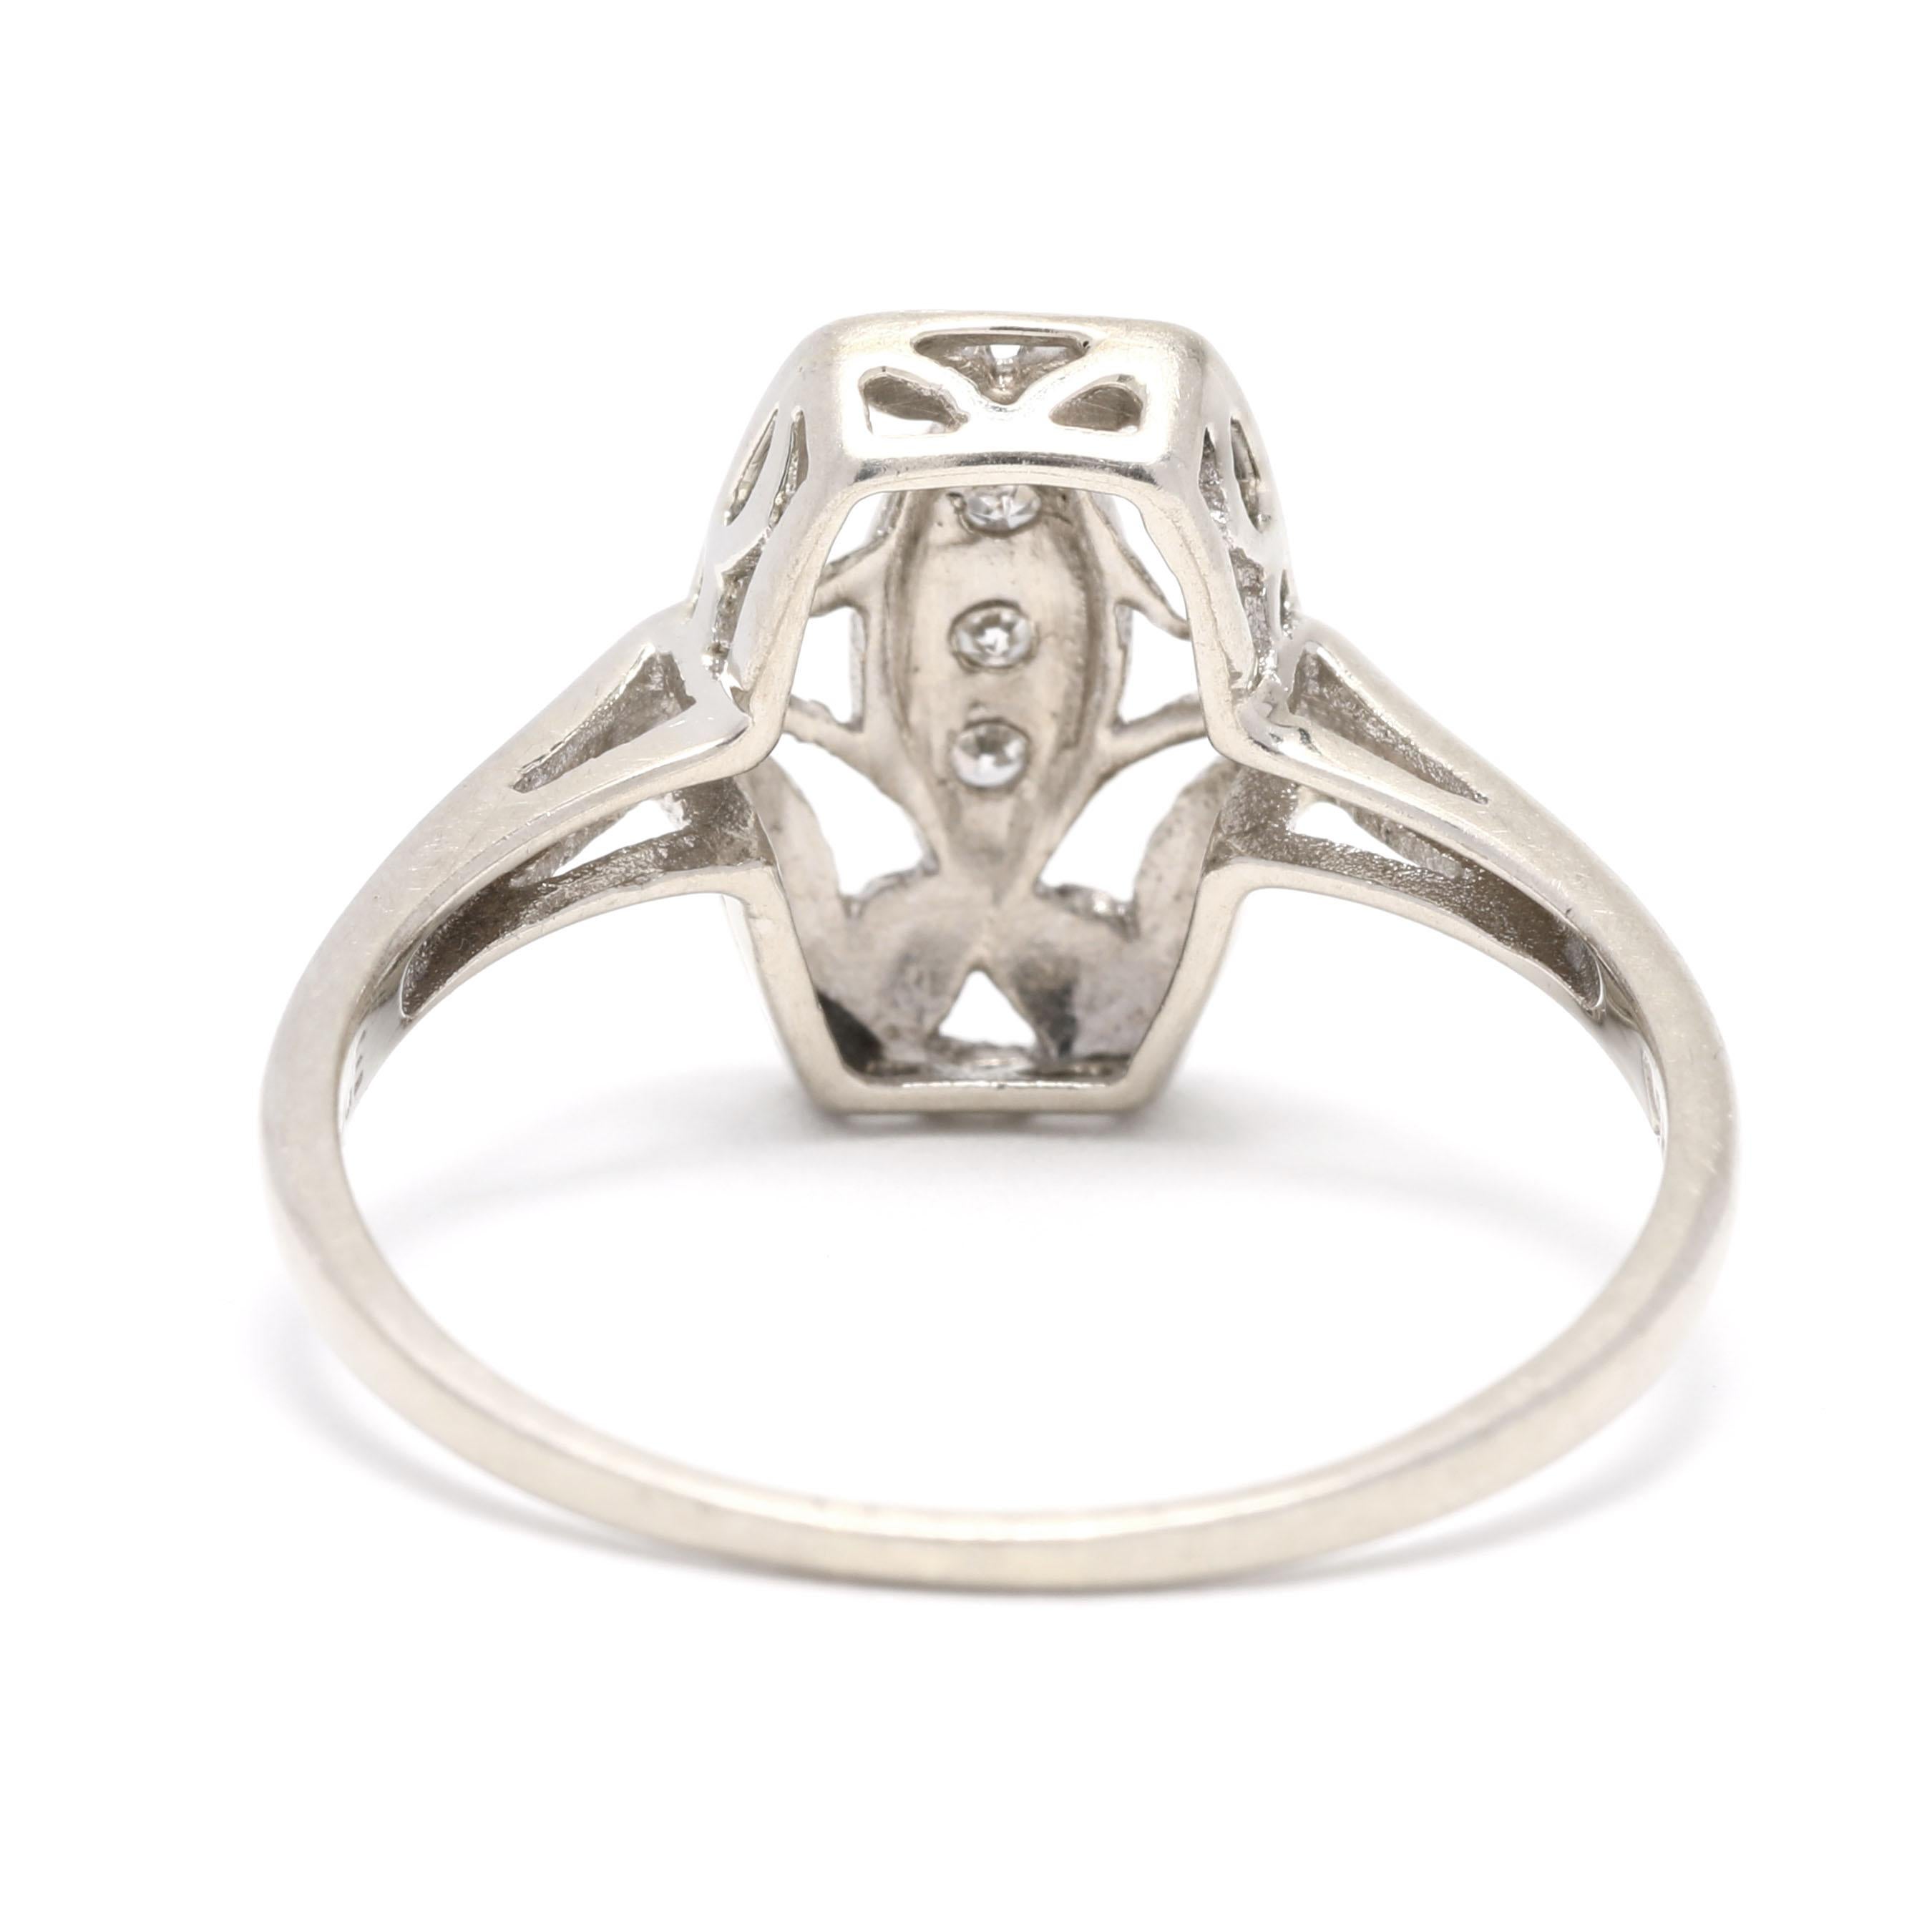 This stunning vintage diamond ring features a 0.03ctw marquise-cut diamond navette set in 14k white gold. Crafted in the 1950s, this exquisite cocktail ring is sure to make a statement. The diamond is set in a milgrain-edged bezel, surrounded by a